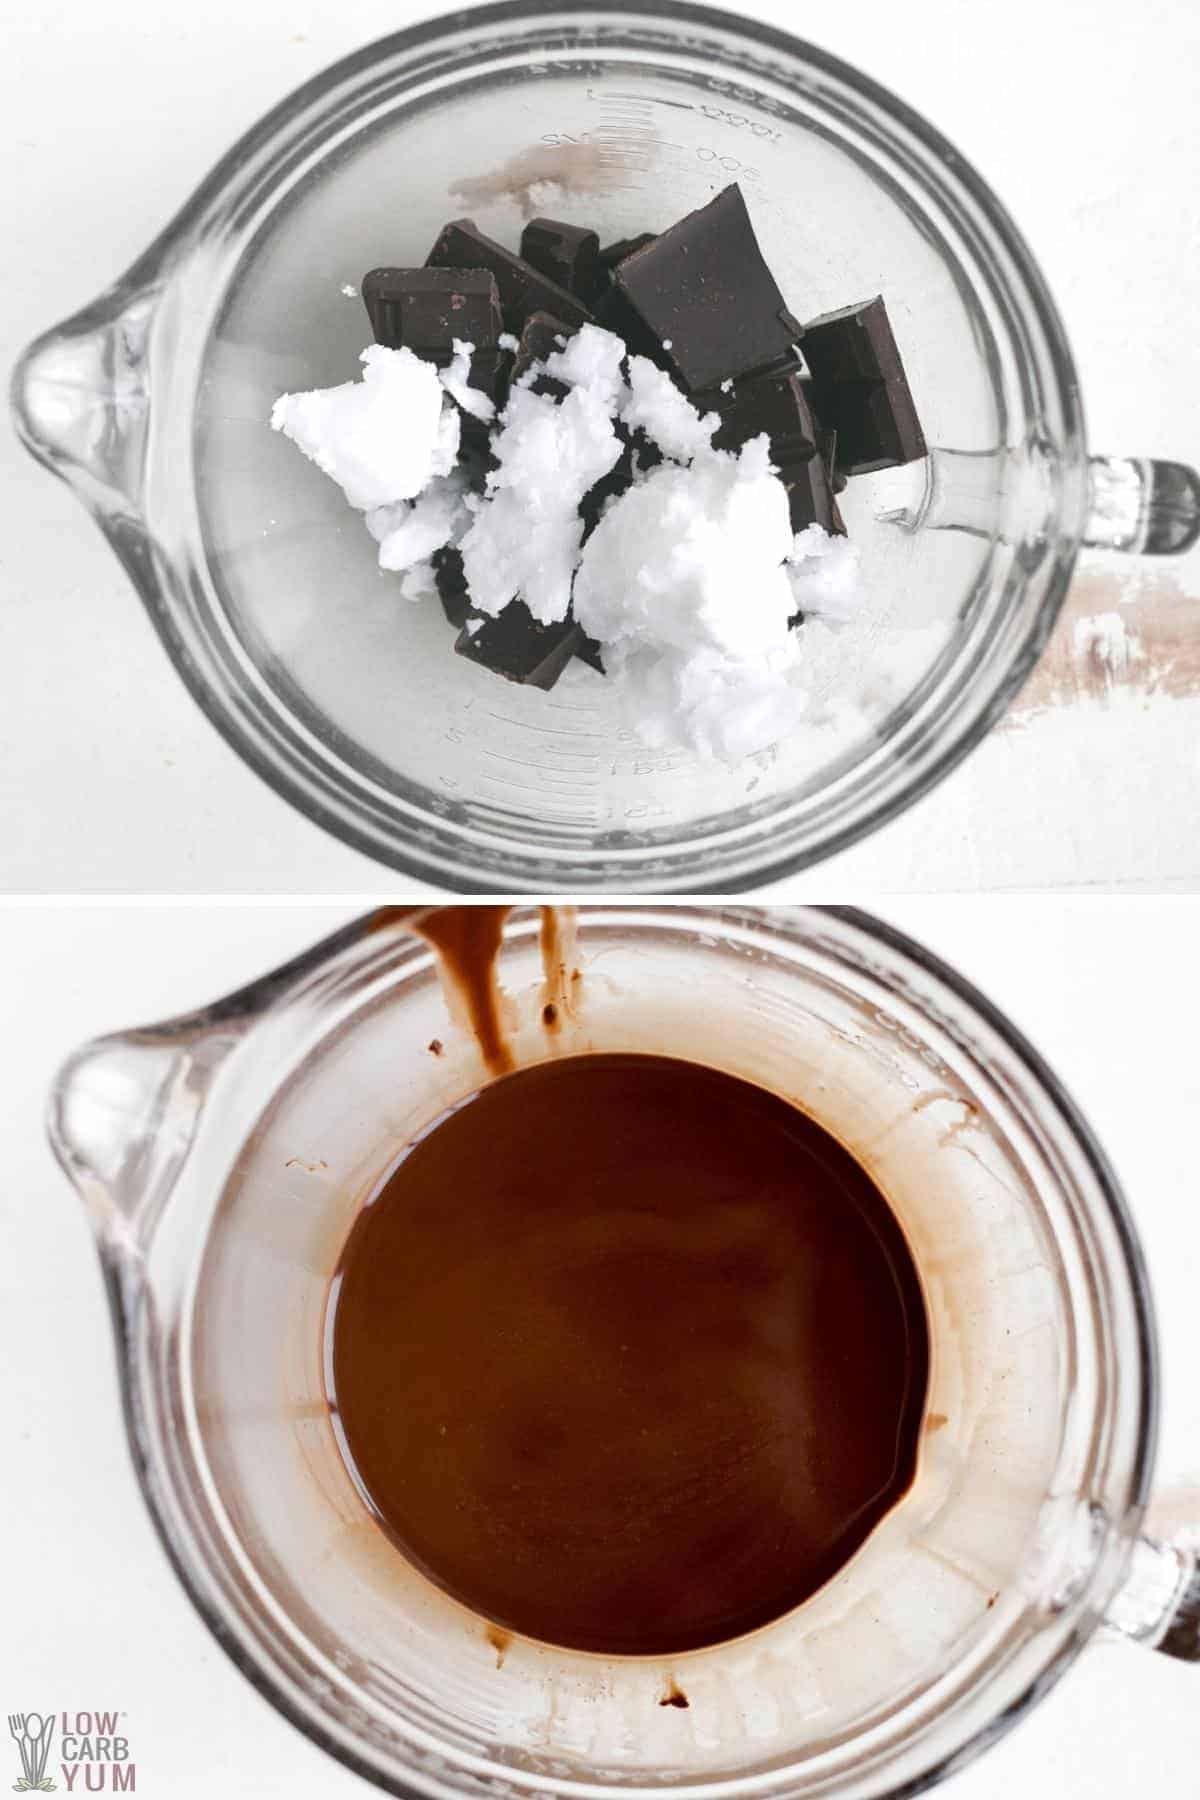 melting the chocolate and coconut oil.